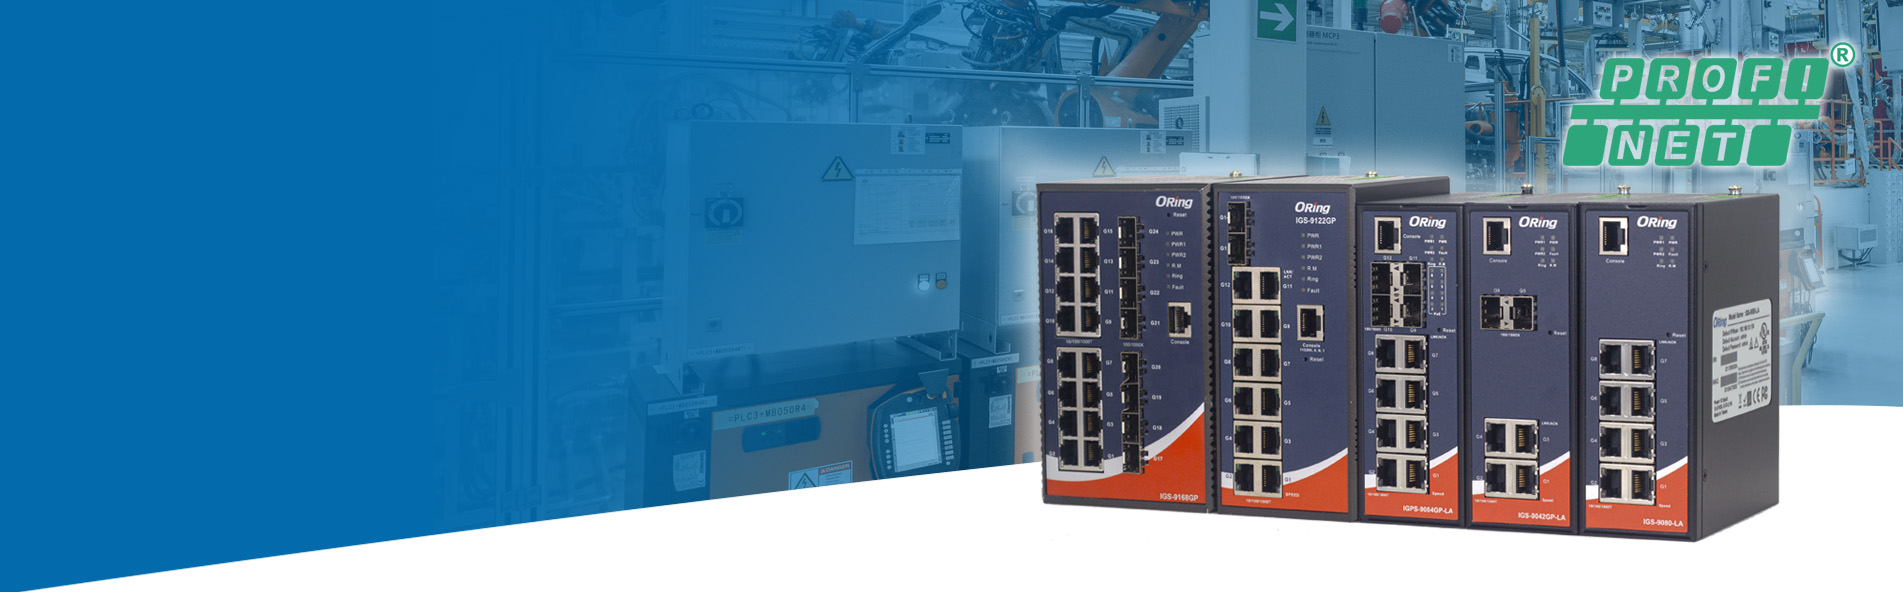 ORing Empowers Automation
with Seamless Connectivity 
through PROFINET-Certified Series